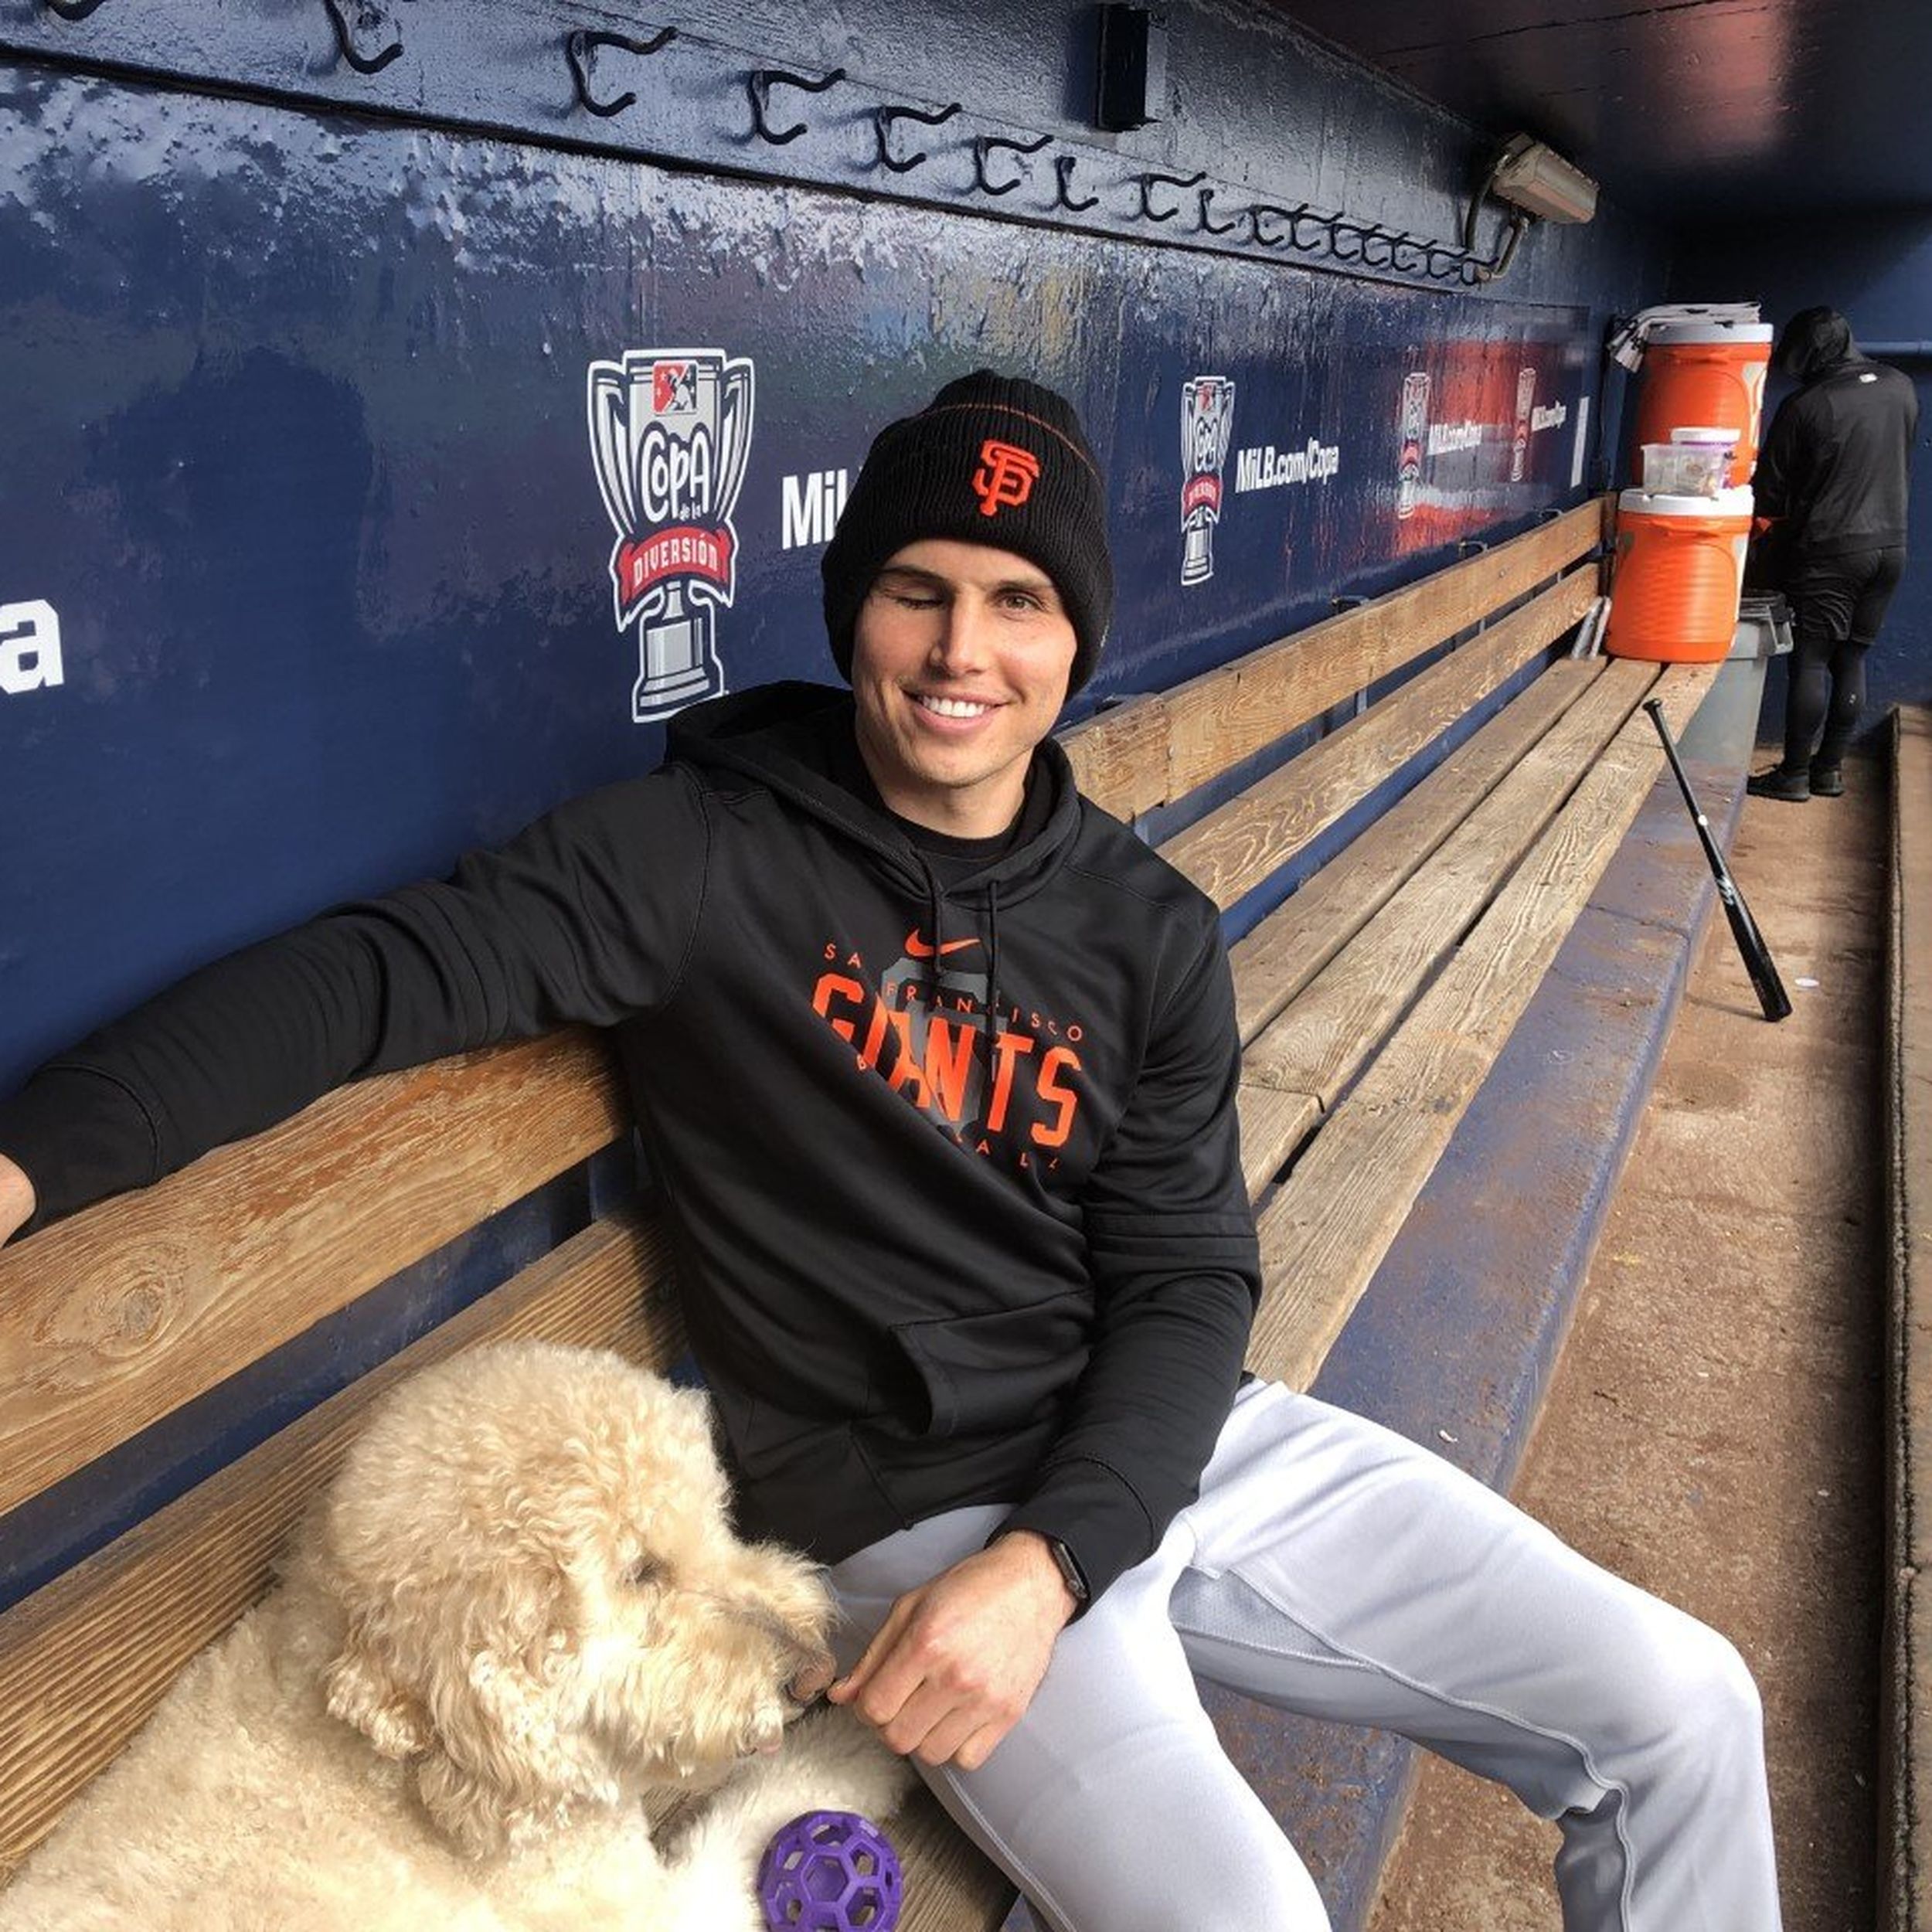 I shouldn't be here': Drew Robinson's journey from suicide attempt to  mental health advocate with San Francisco Giants organization